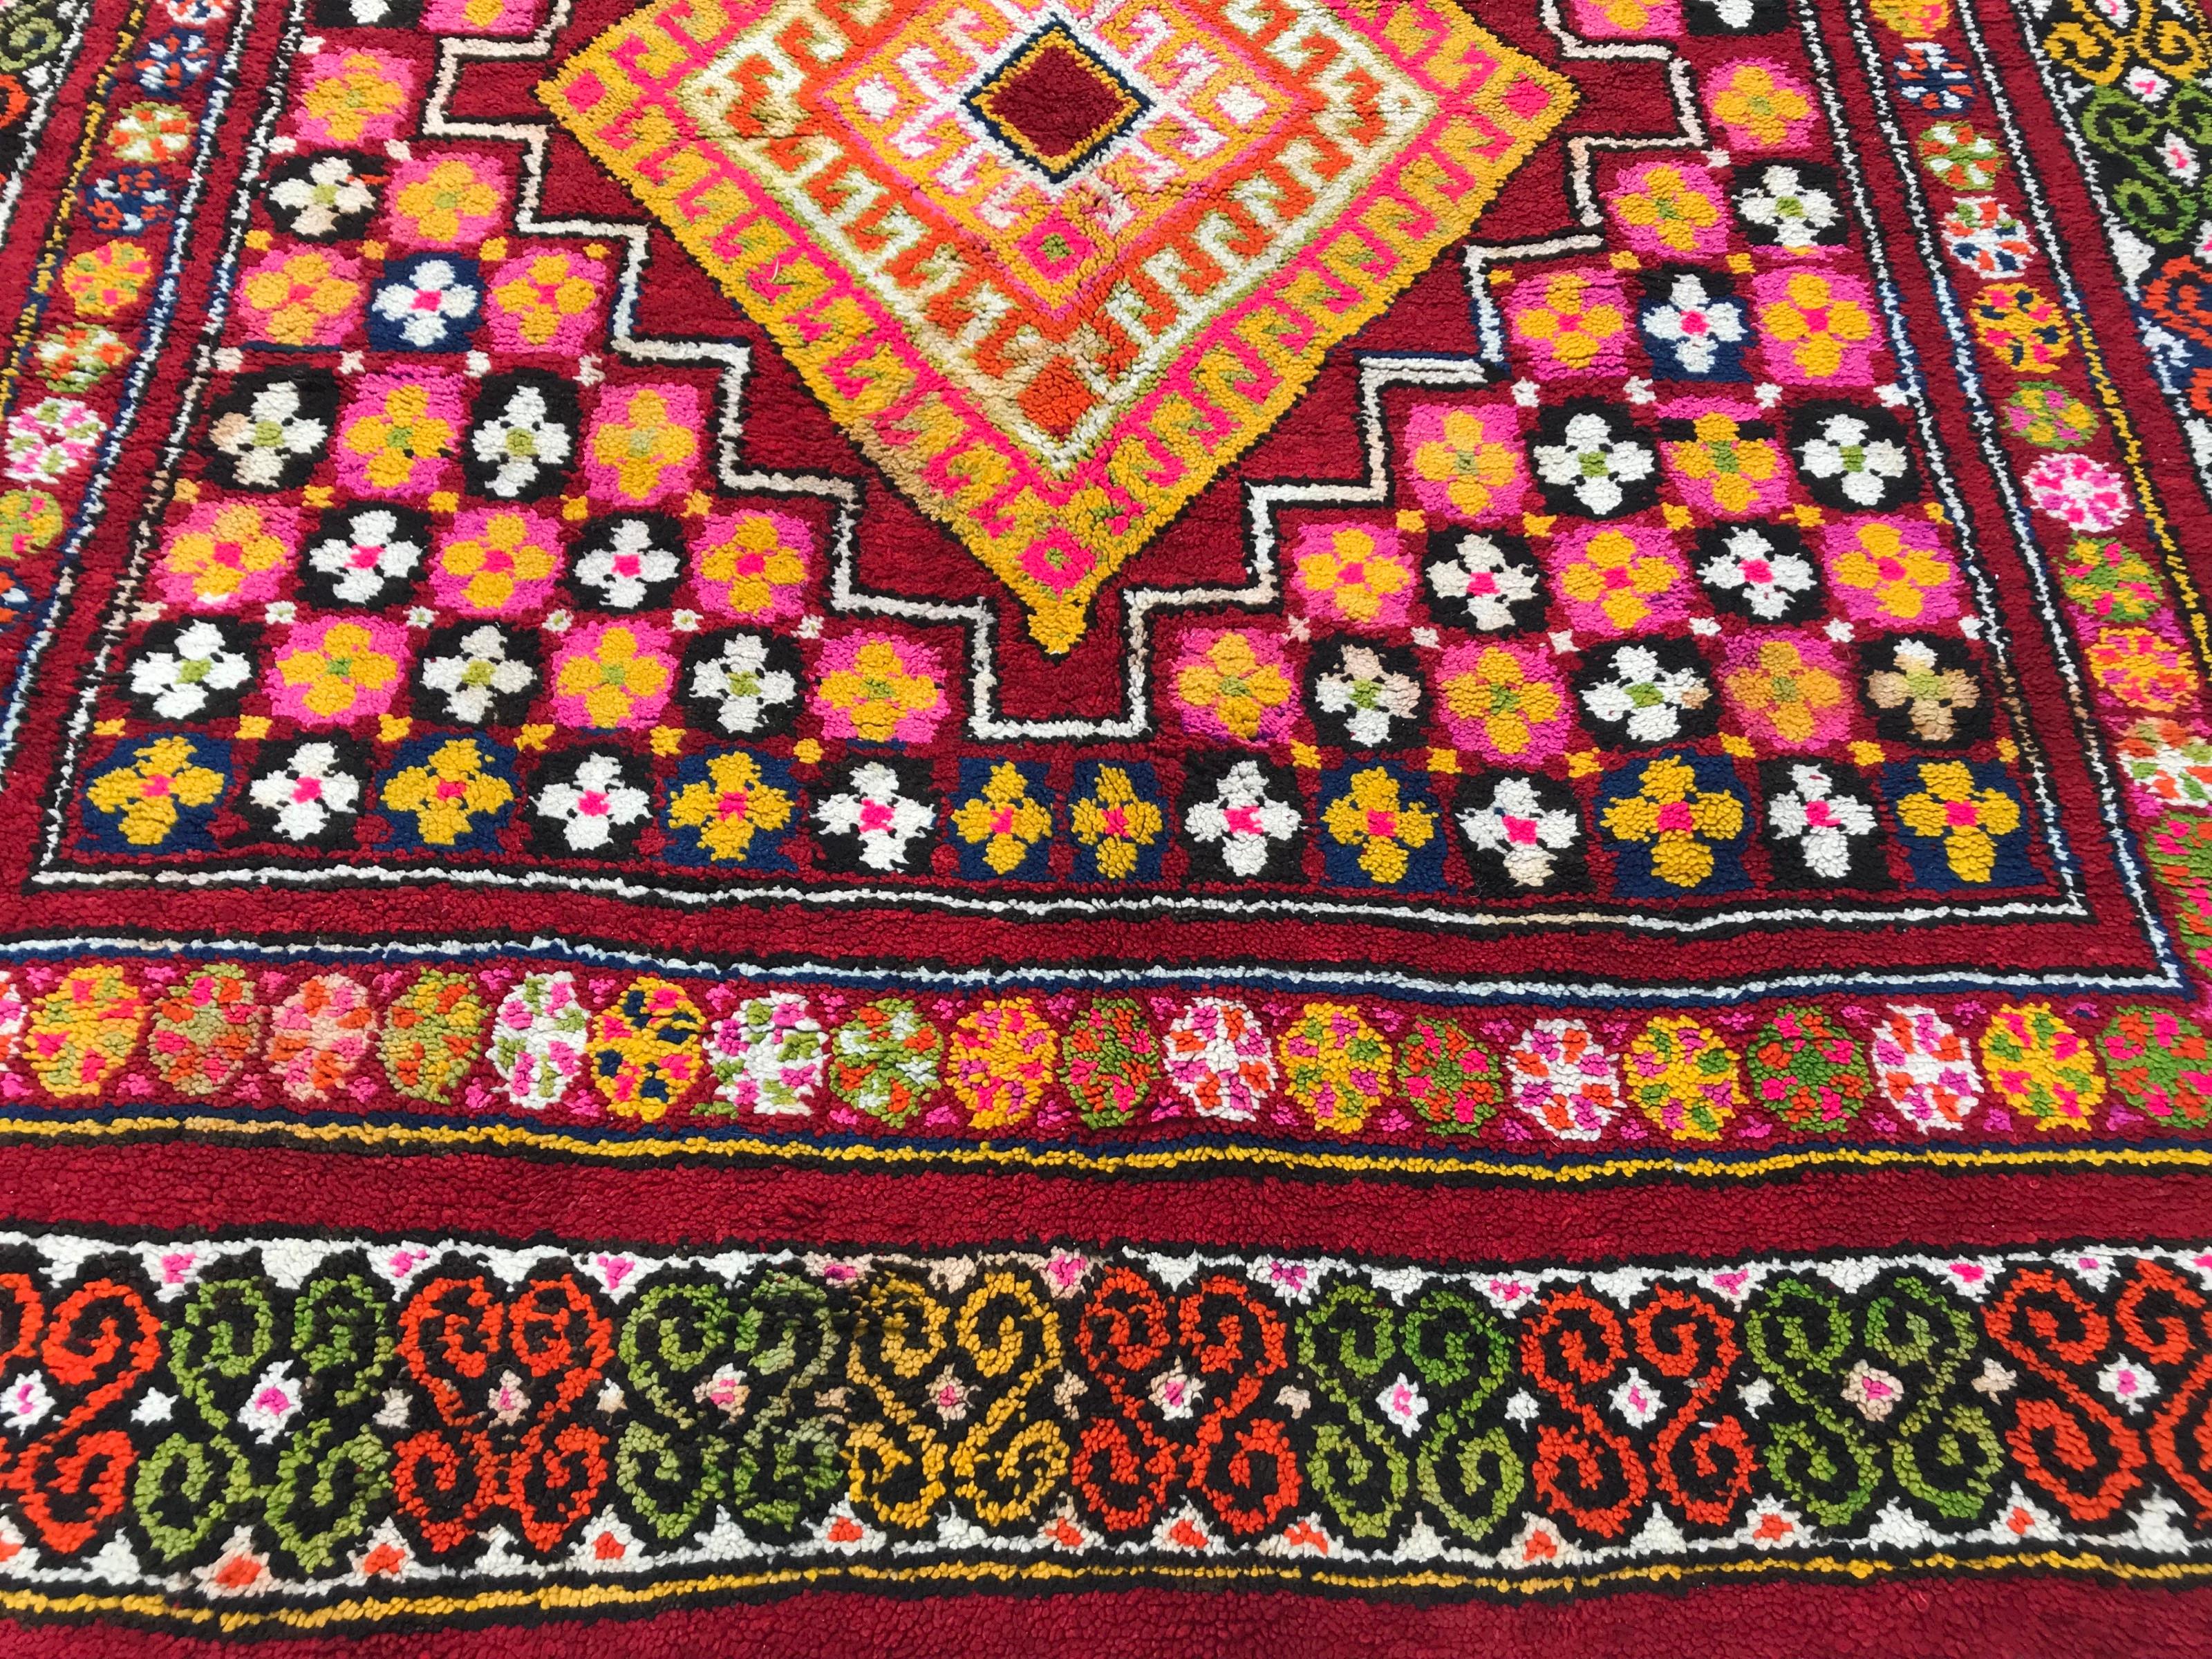 Bobyrug's Very Beautiful Moroccan Berbere Colorful Rug (Wolle) im Angebot